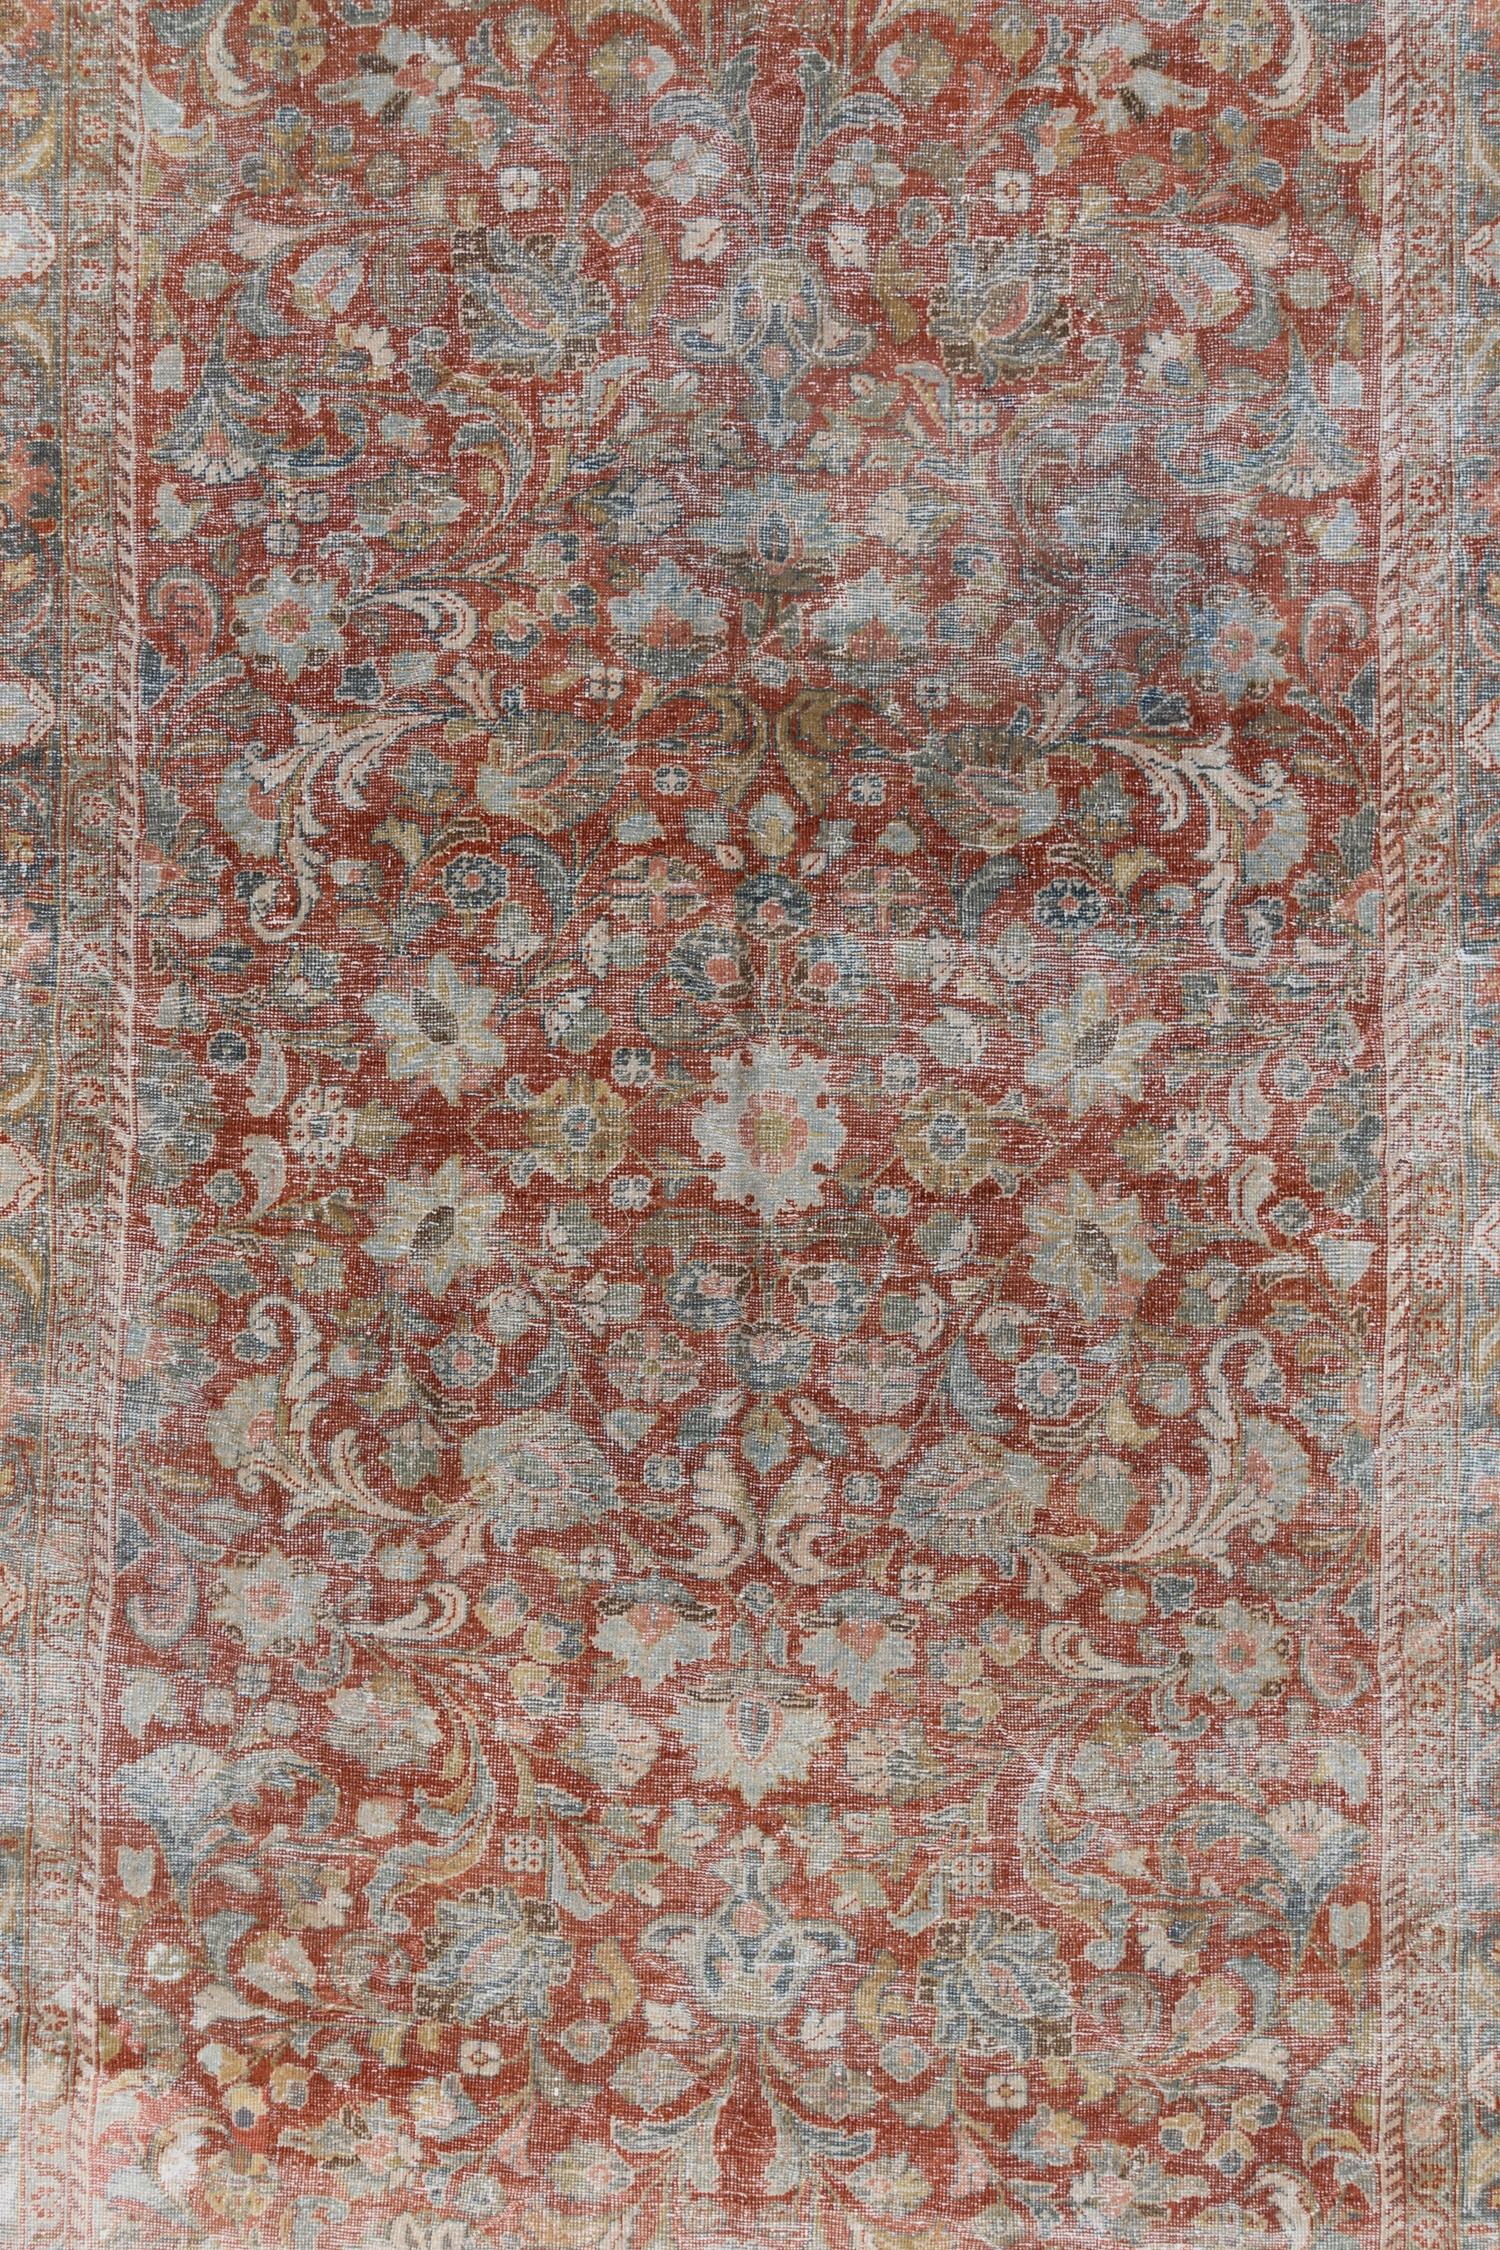 Vintage Oriental Mahal

Circa: 1940

Pile: Low

Wear notes: even wear, no holes

Good worn condition. Our favorite shade of red with beautiful florals throughout. One of our favorite rugs for layering or on its own. It has a sophisticated